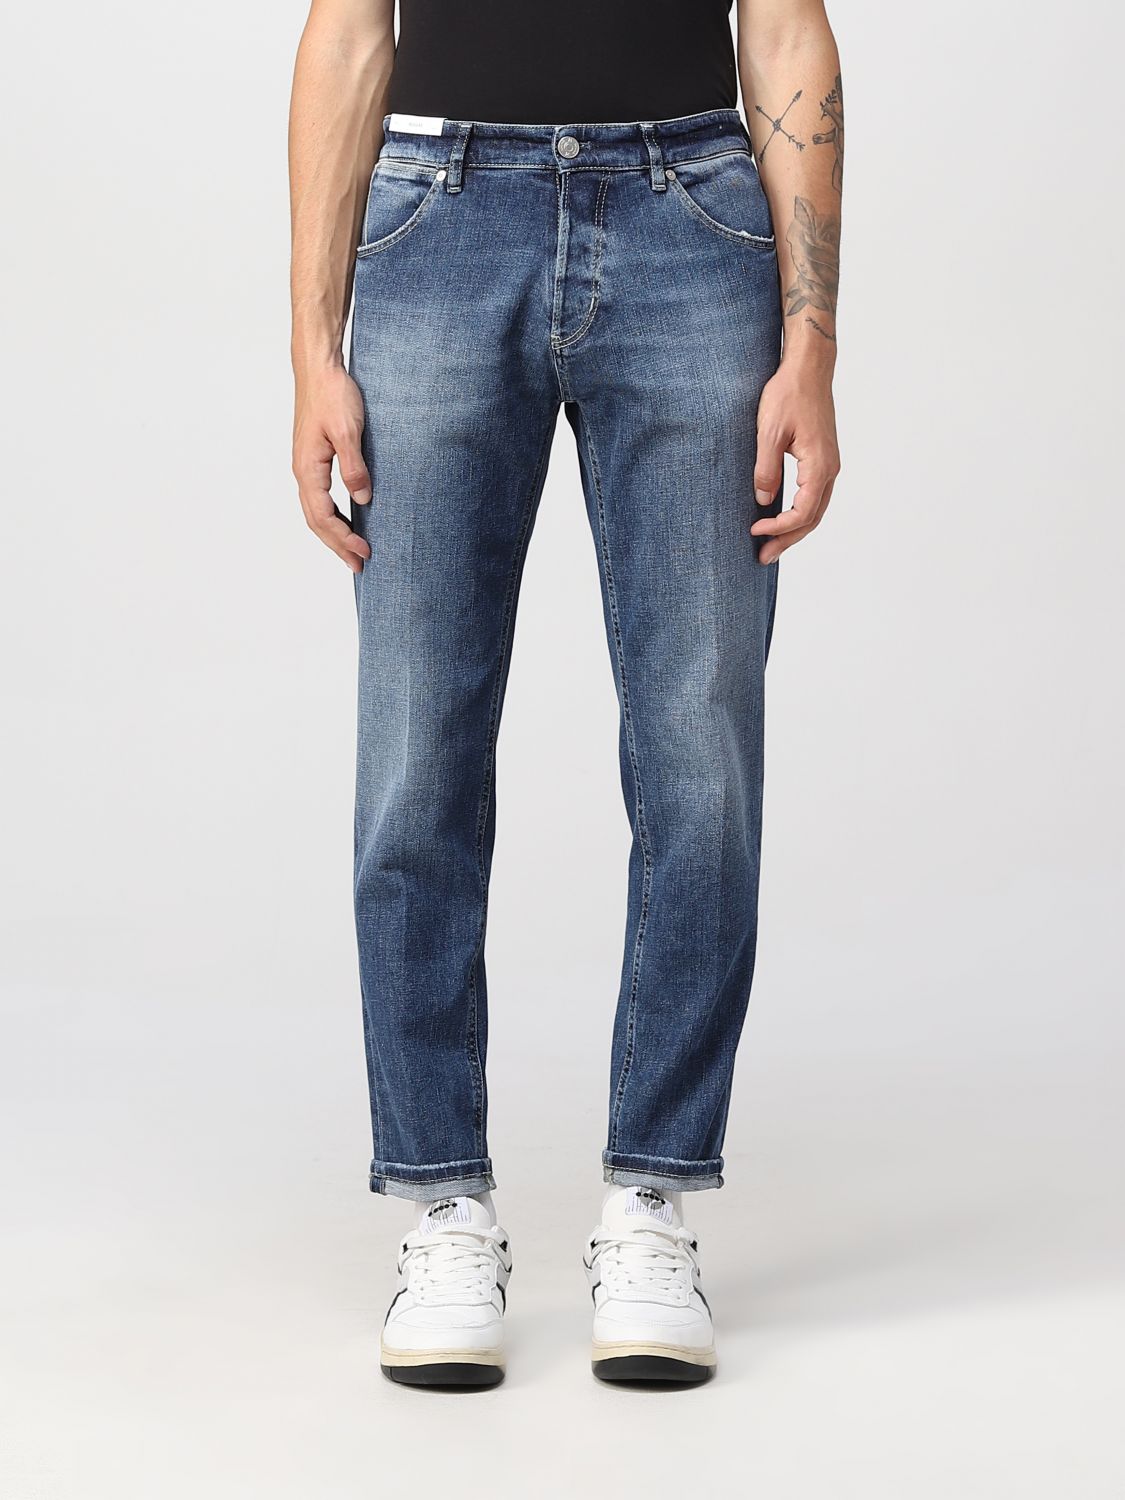 PT TORINO: jeans for man - Stone Washed | Pt Torino jeans ...